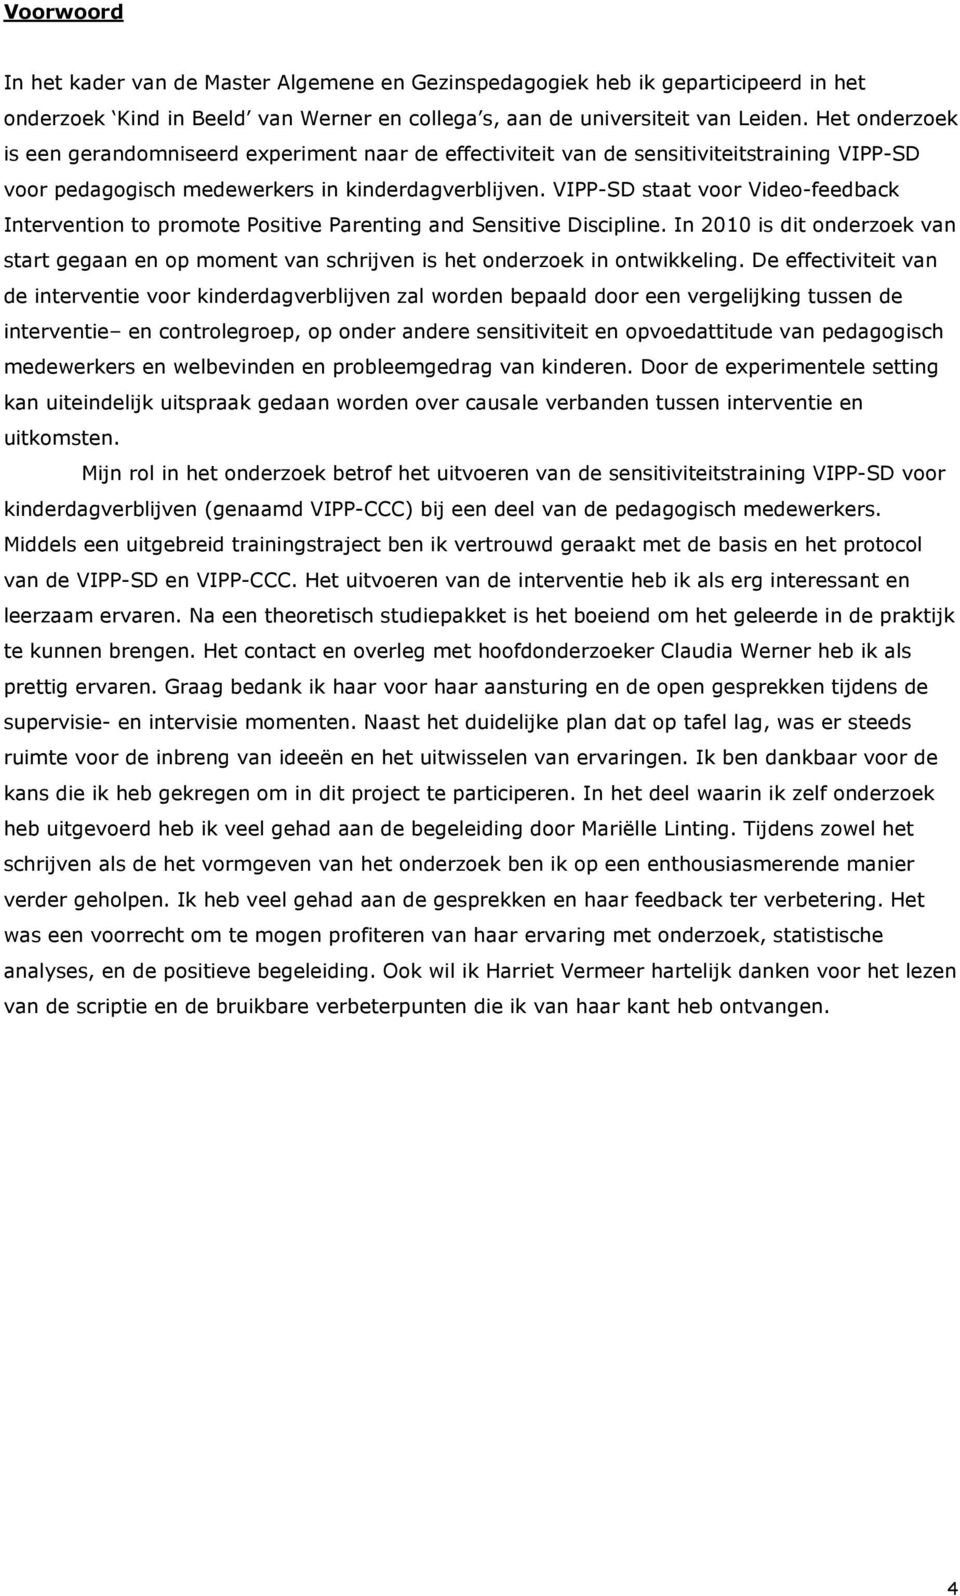 VIPP-SD staat voor Video-feedback Intervention to promote Positive Parenting and Sensitive Discipline.